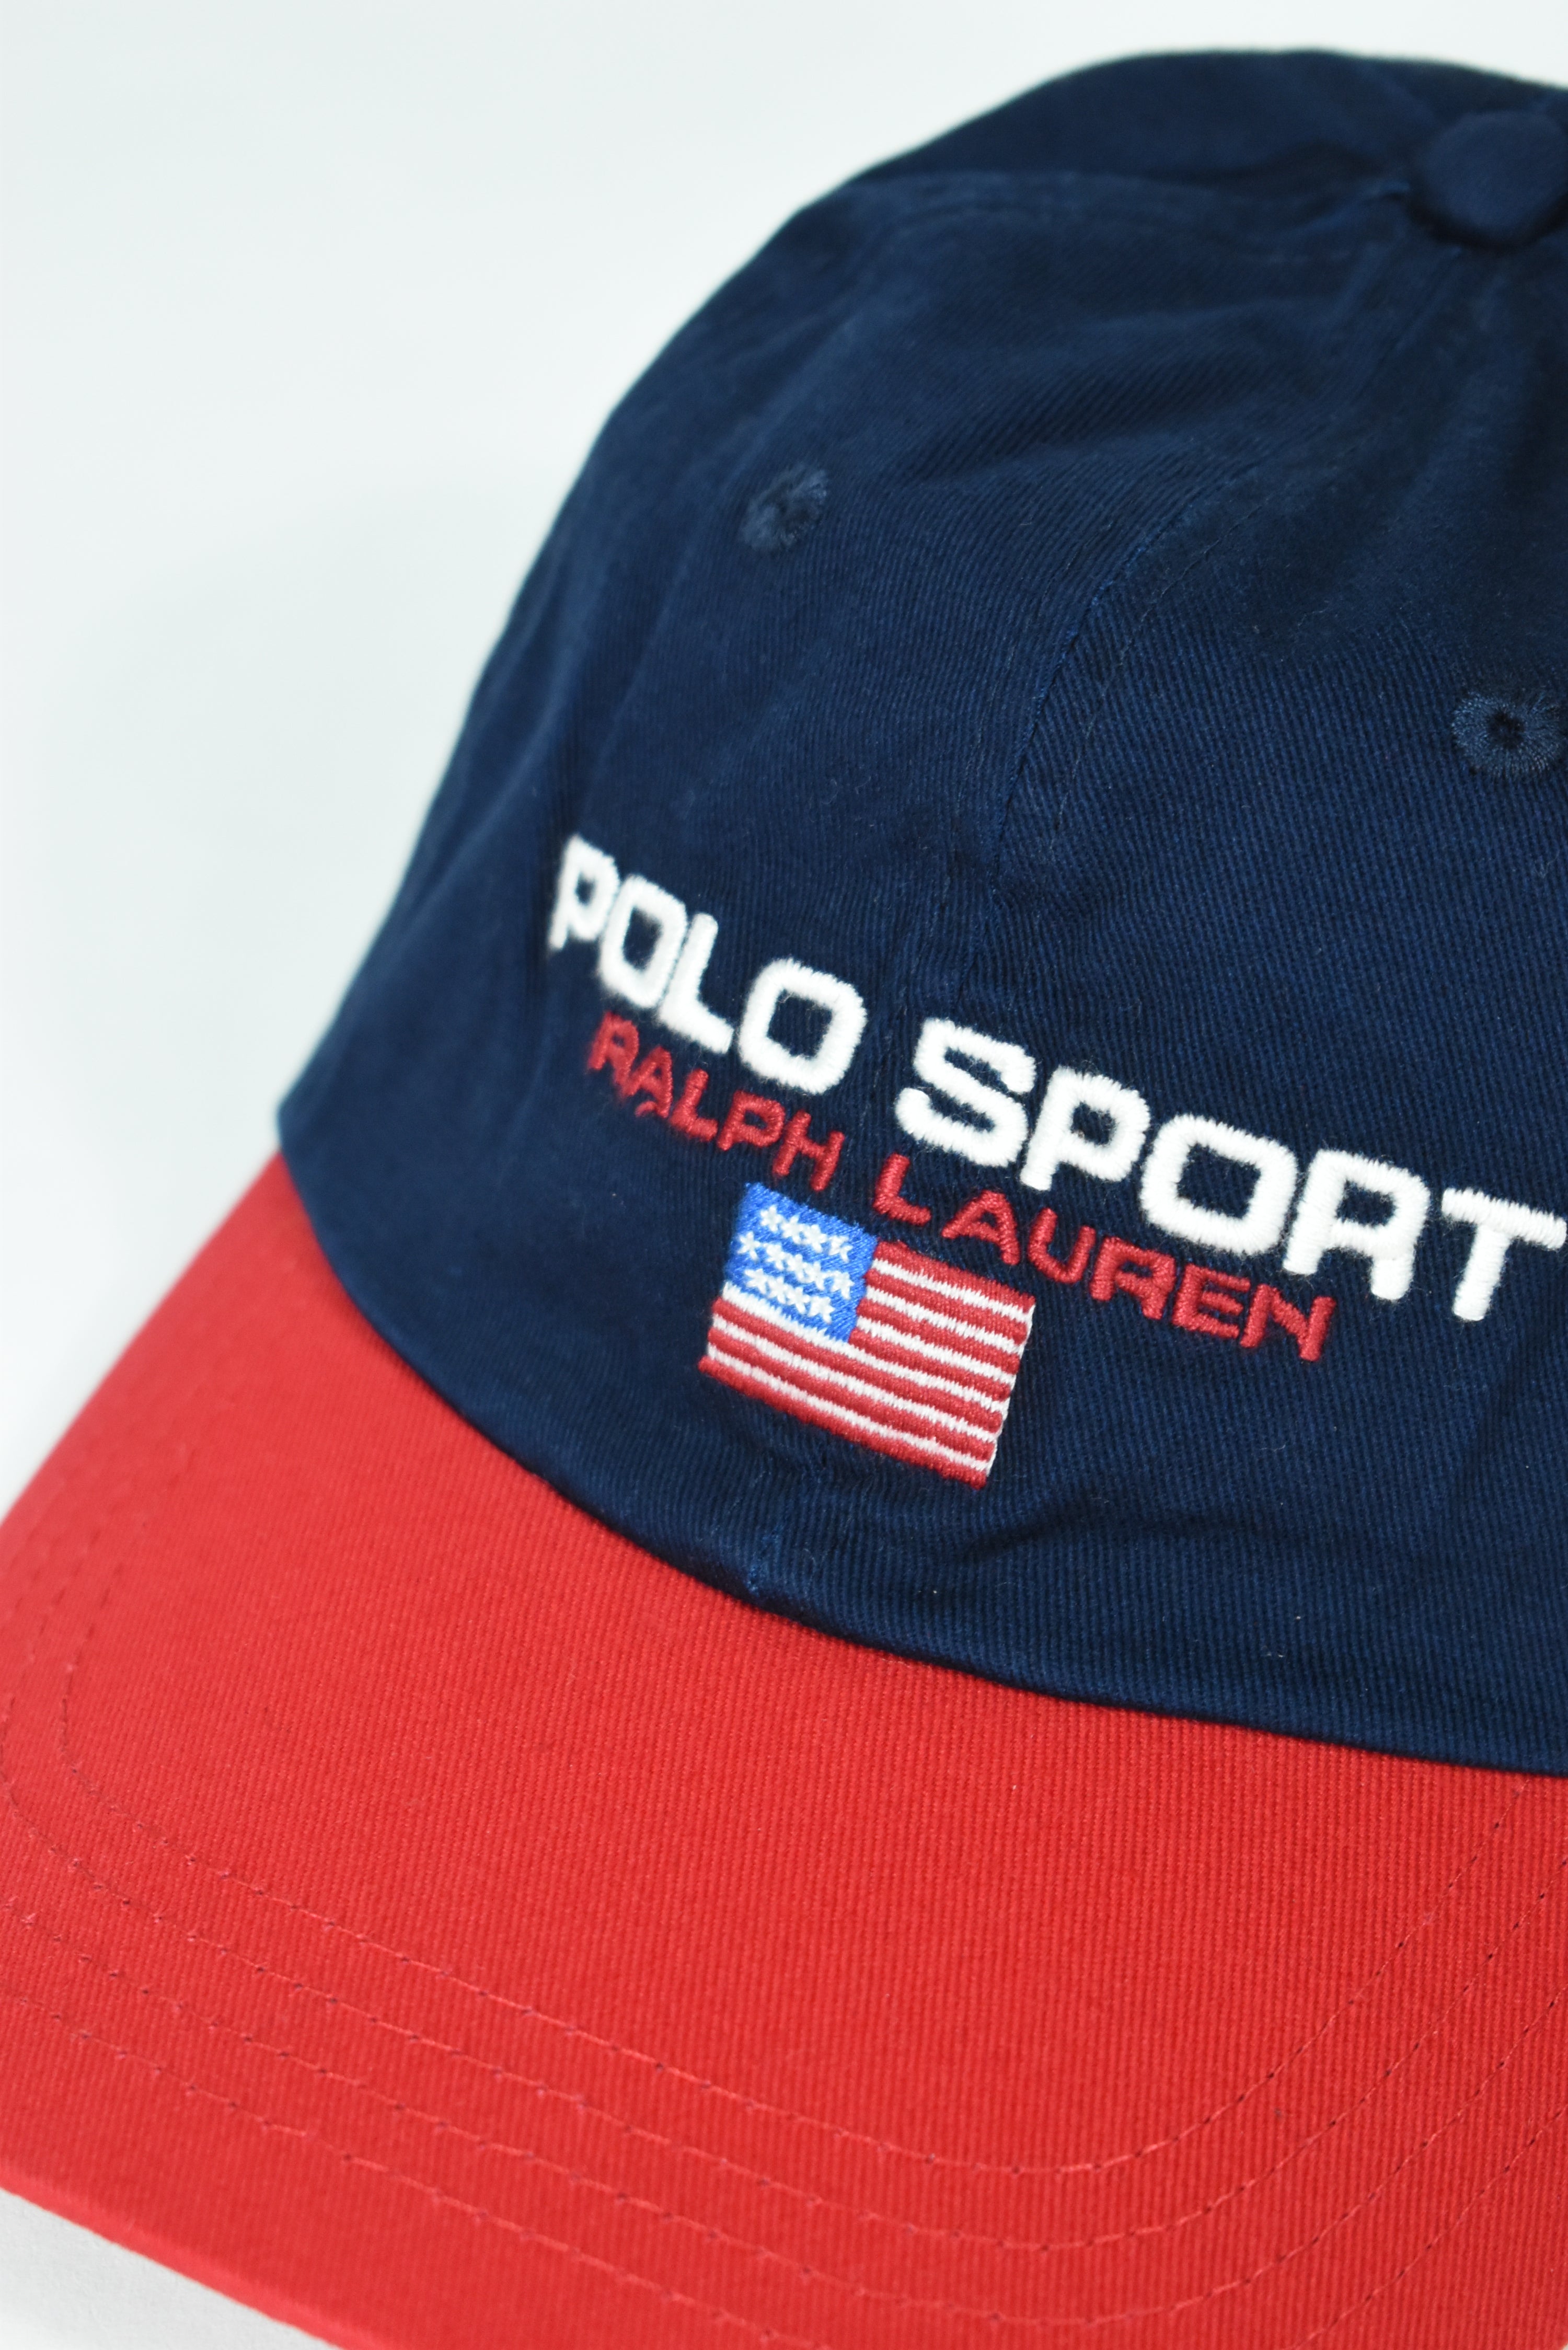 New Navy/Red RL Polo Sport Embroidery Cap